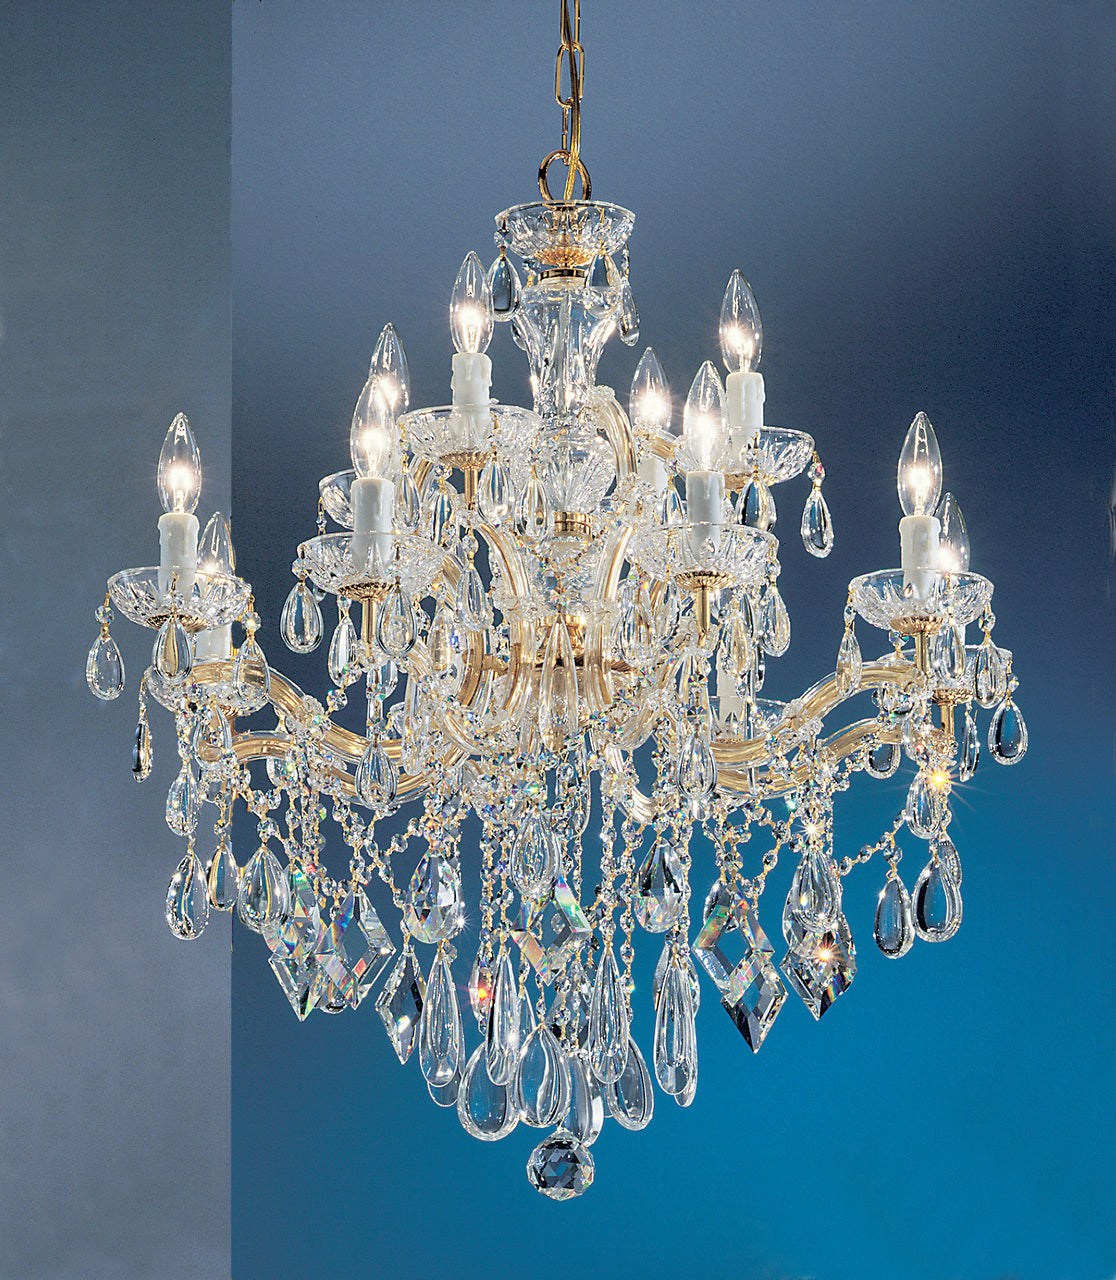 Classic Lighting 8354 GP C Rialto Contemporary Crystal Chandelier in Gold